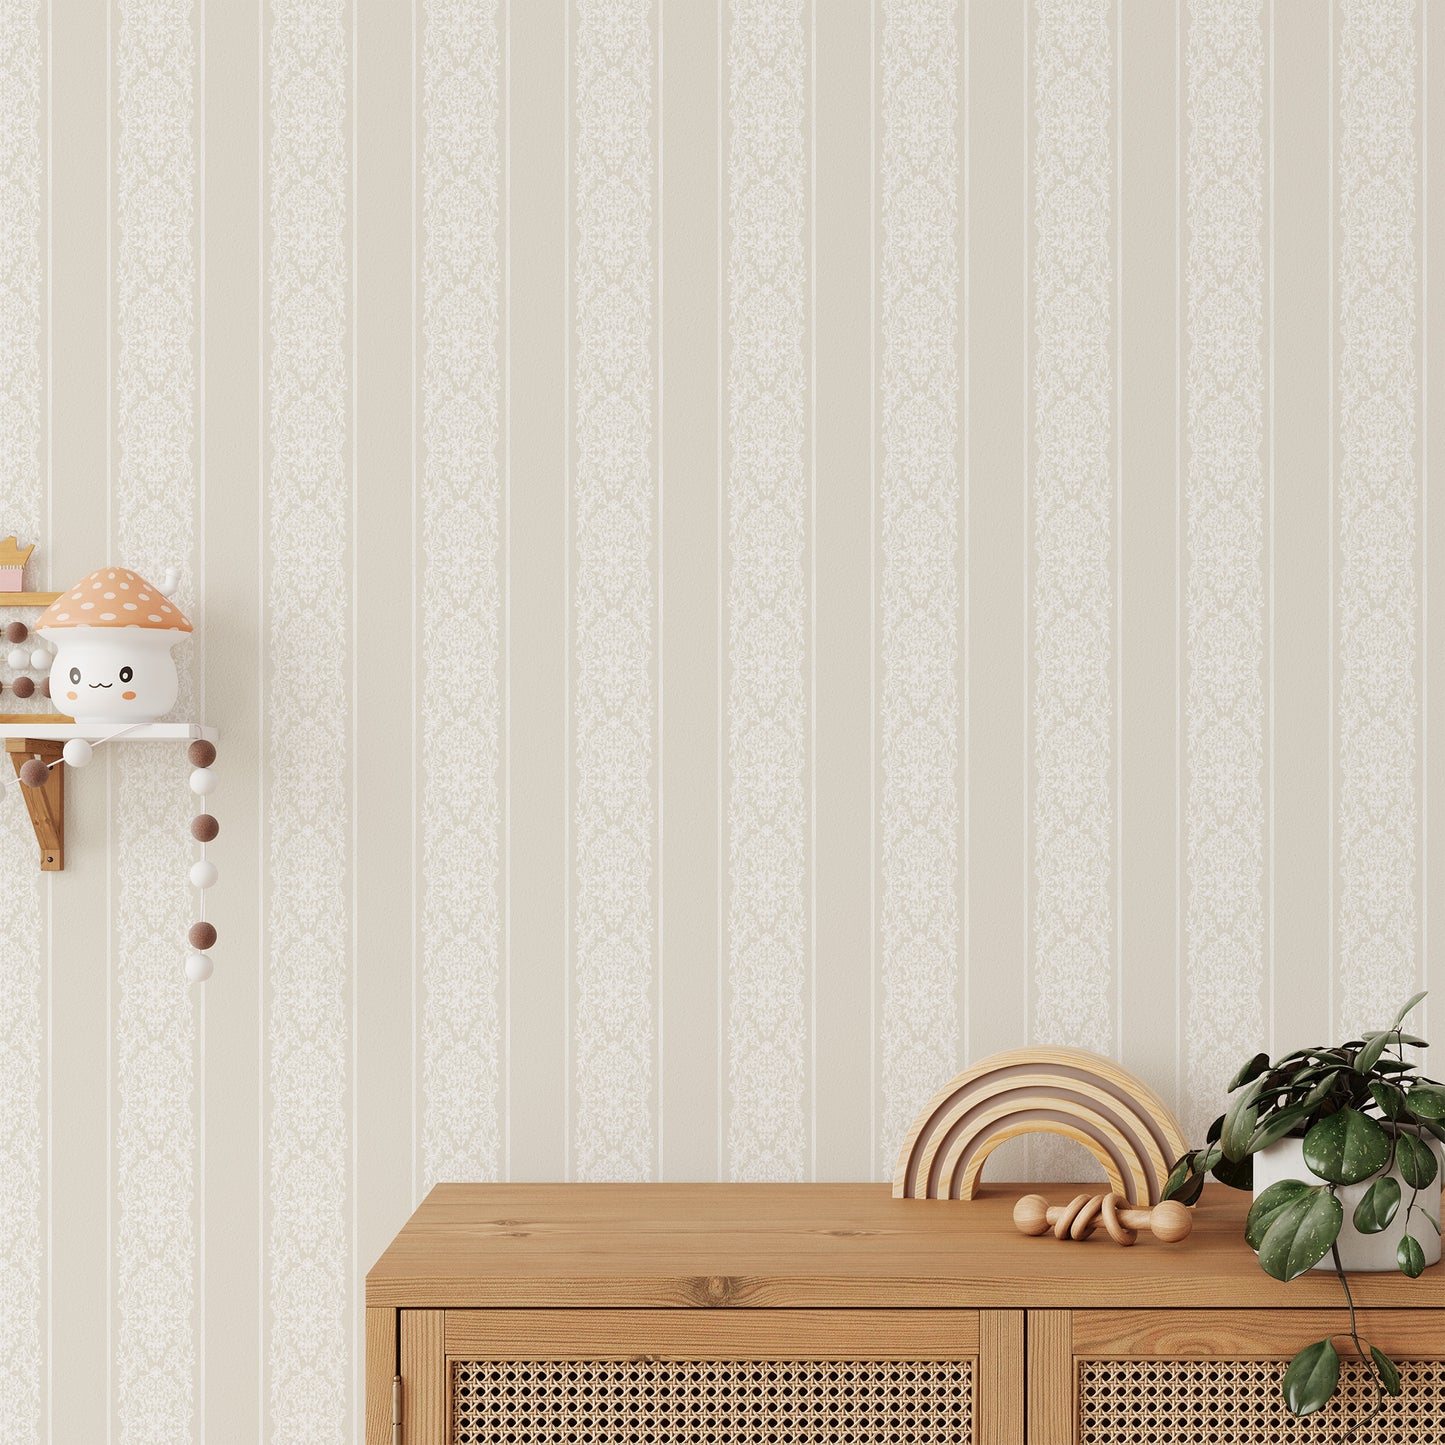 The classic and elevated design, adorned in a timeless taupe hue wallpaper shown in a full size image.